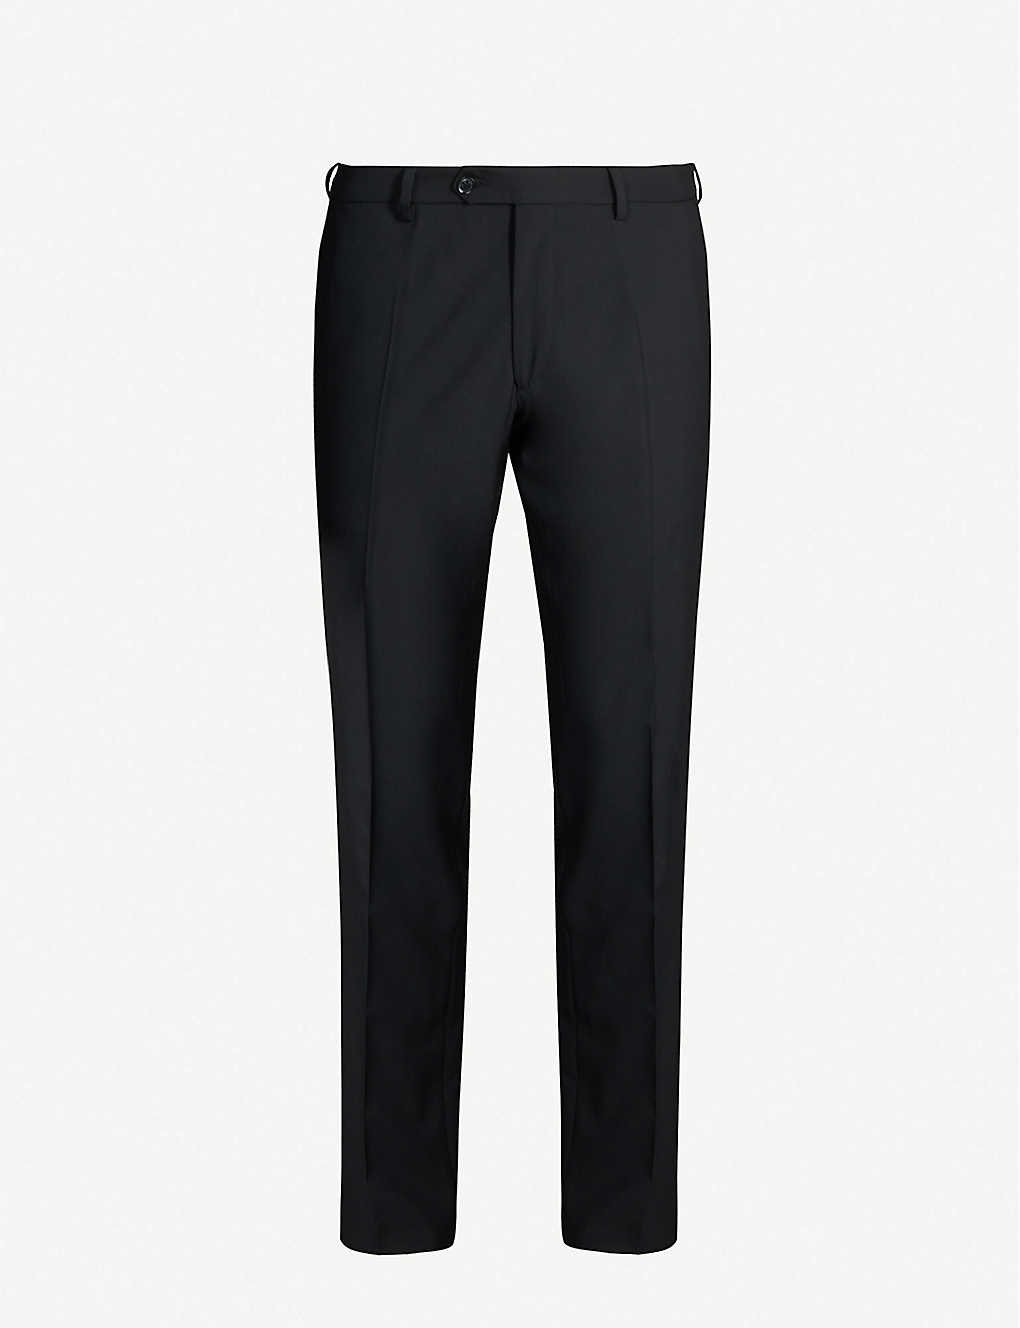 Grey virgin wool Saba trousers | Brioni® CY Official Store